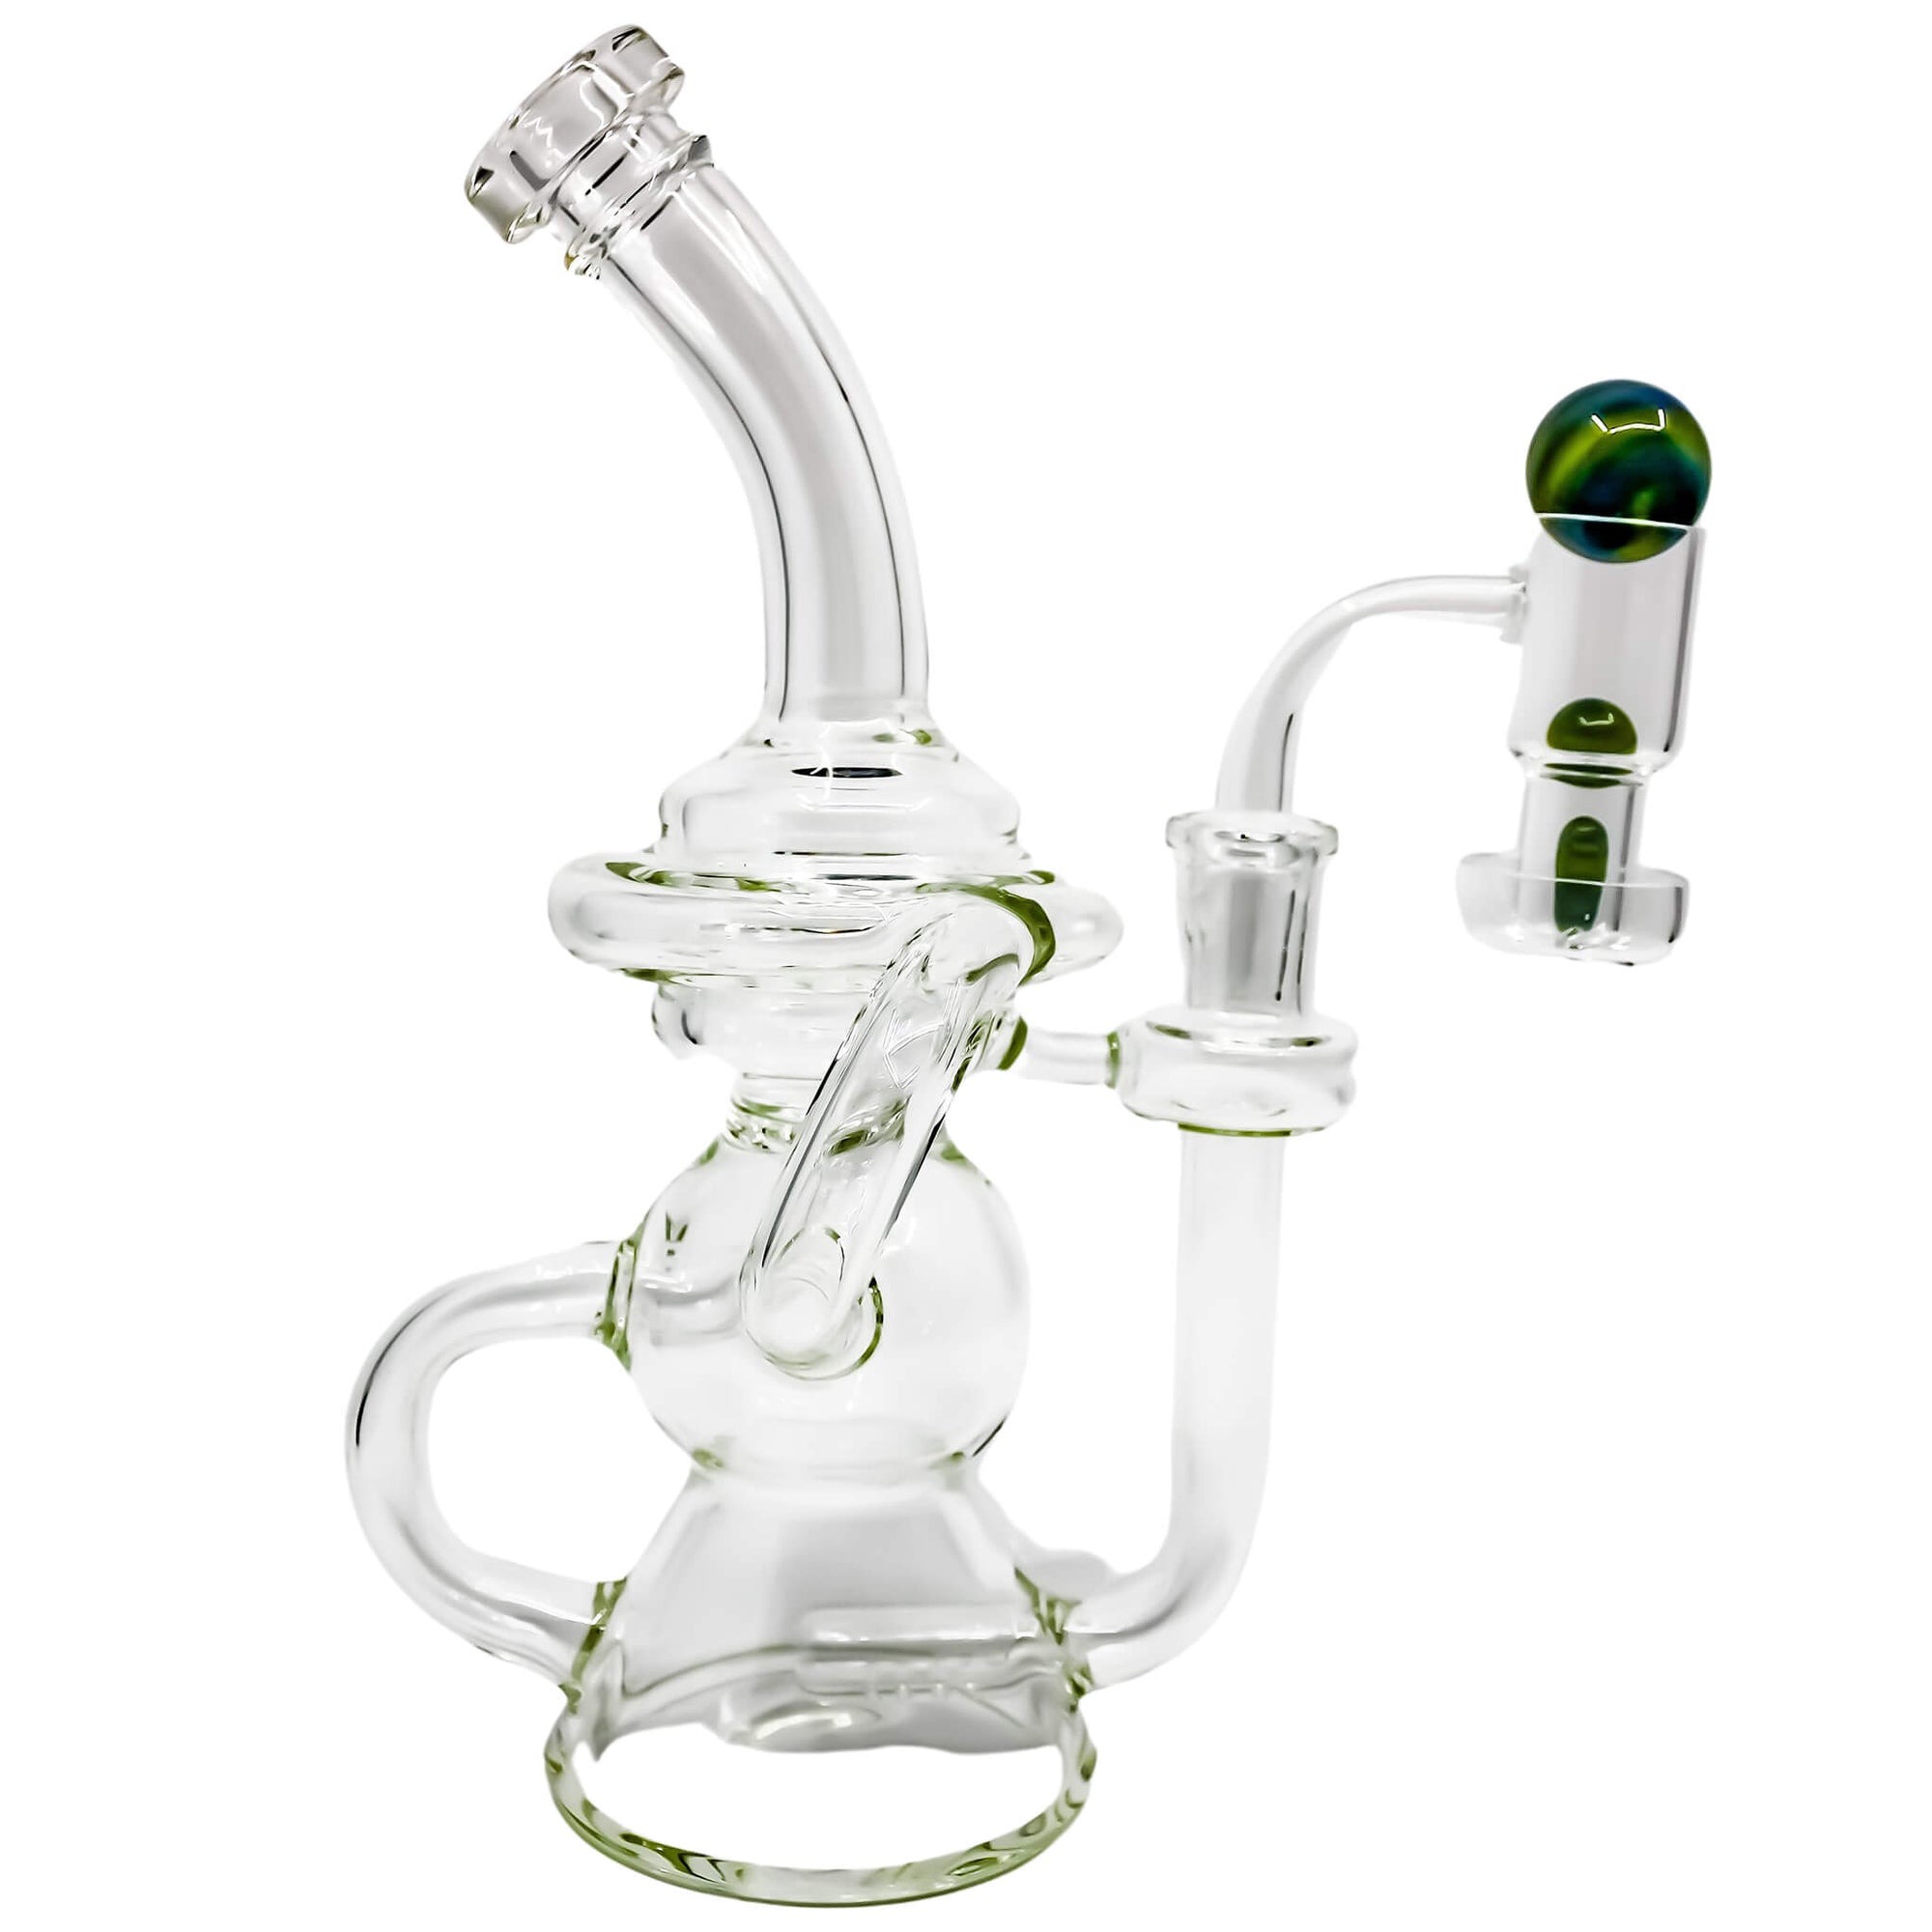 Vornadic Klein Recycler Slurper Dab Kit | Green-Yellow Color | the dabbing specialists